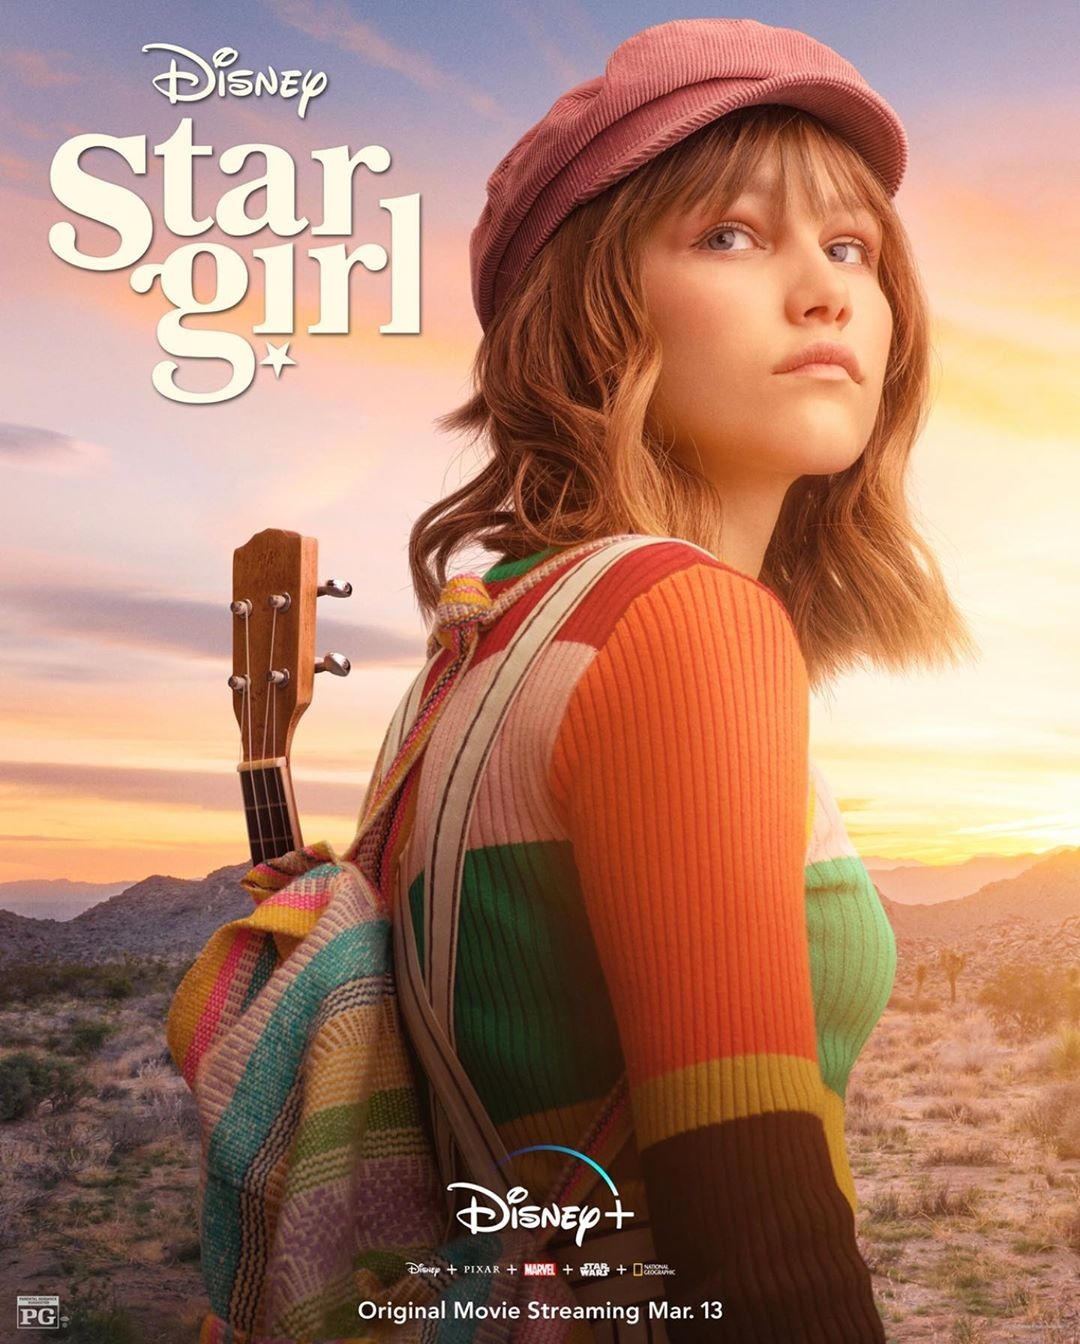 Extra Large TV Poster Image for Stargirl (#1 of 2)